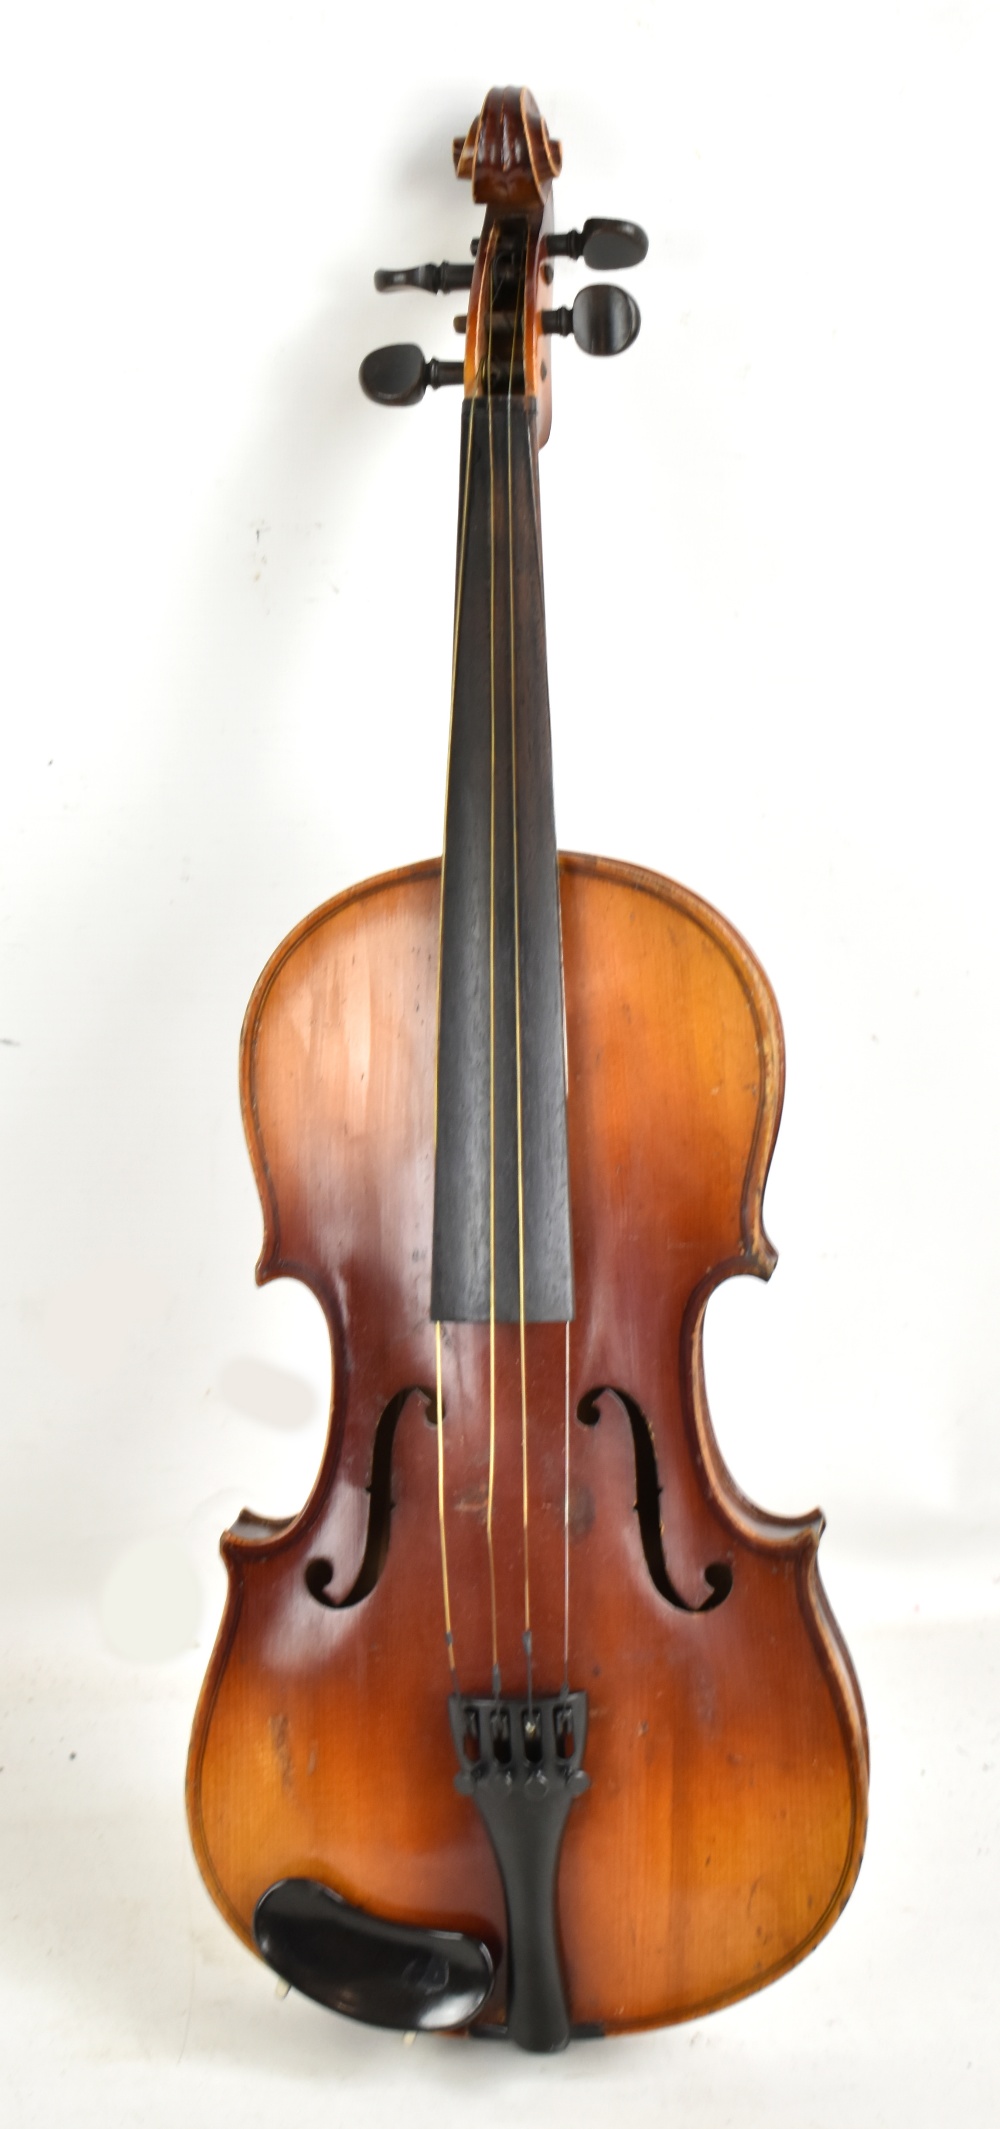 A full size German Wallis's student's violin, patent no.5781, with two-piece back, length 35.6cm, - Image 7 of 10